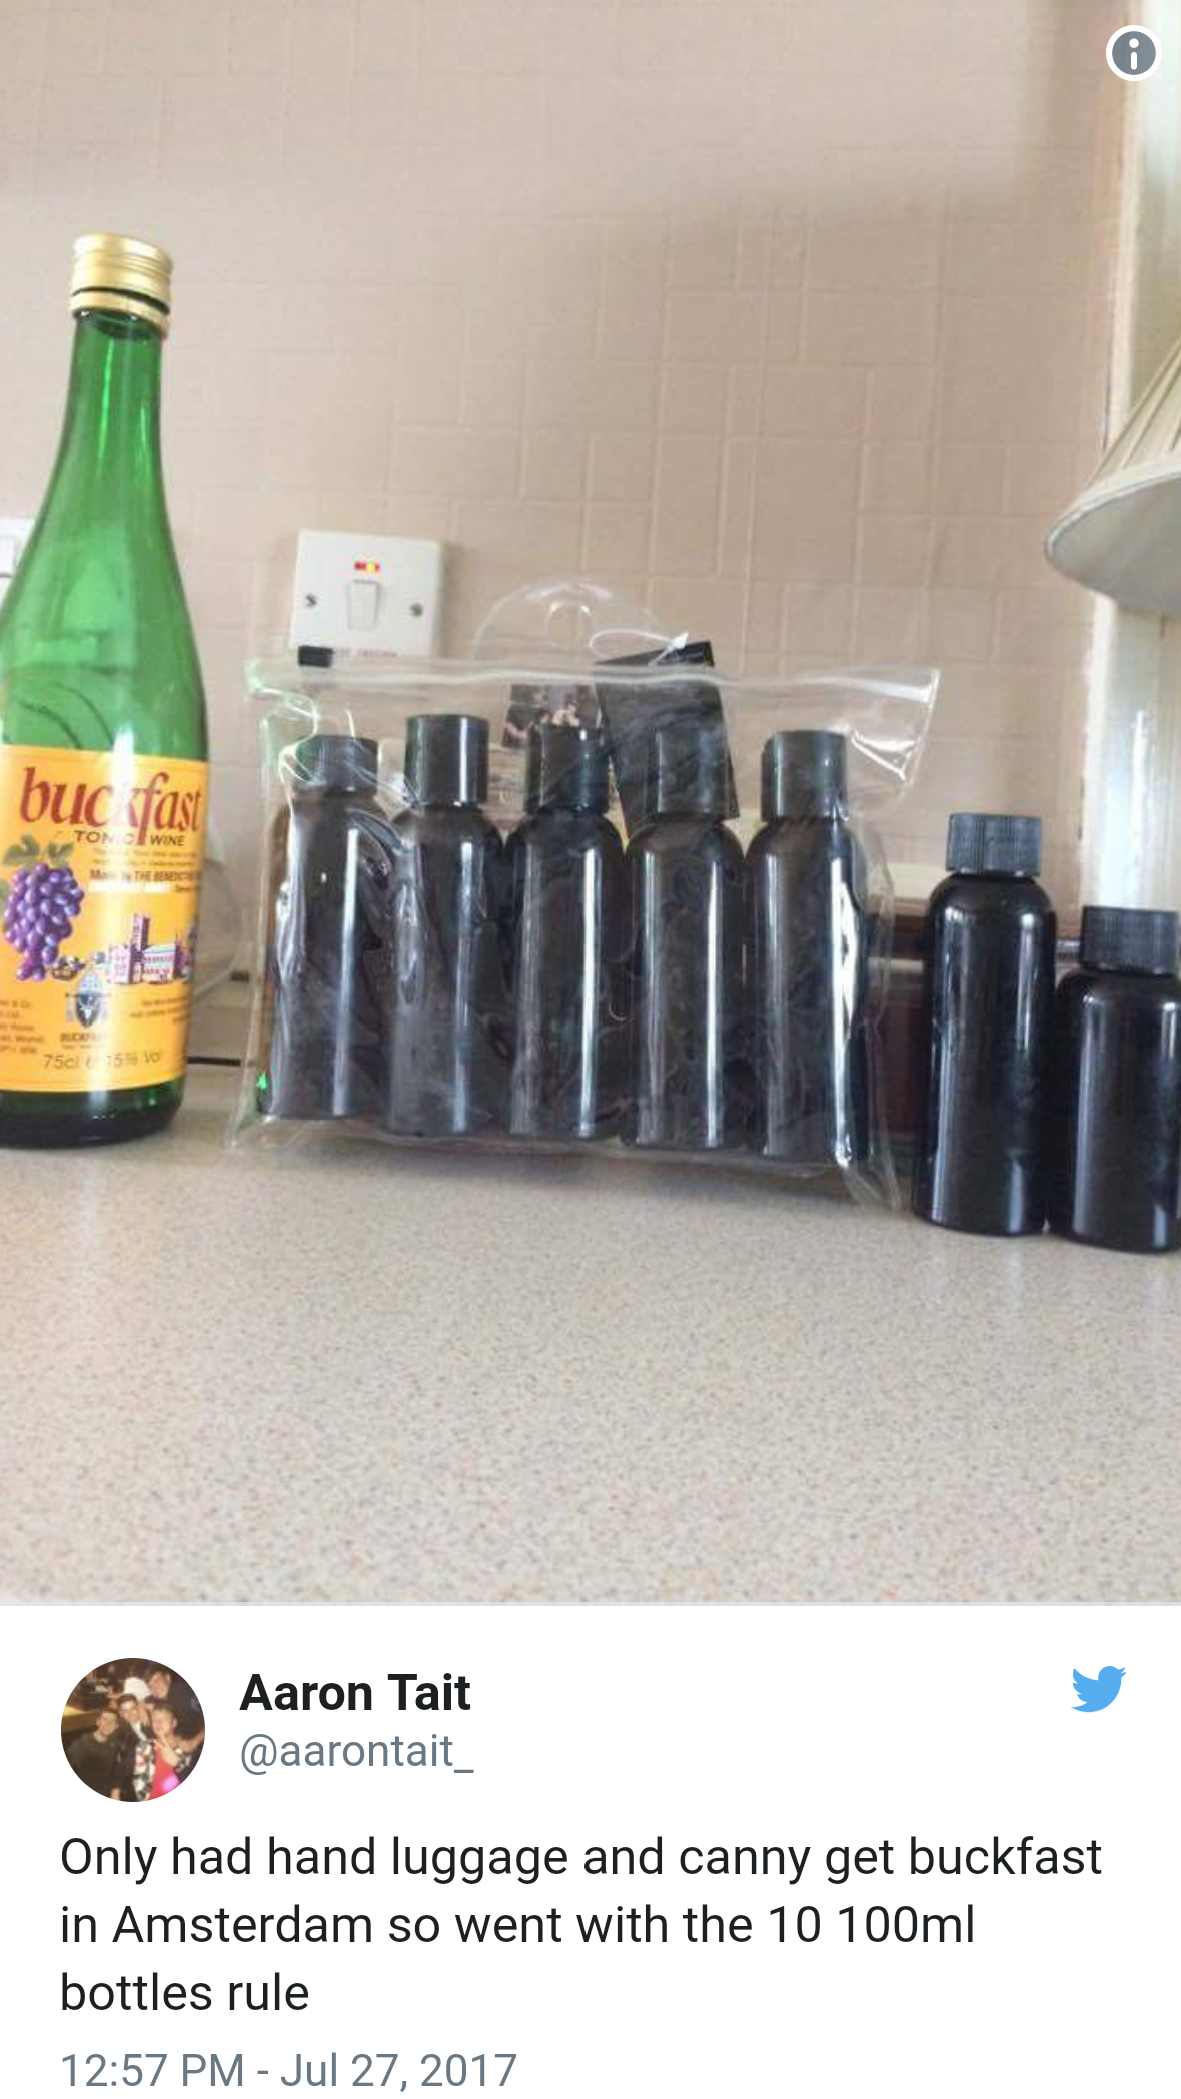 Alcohol in shampoo bottles.